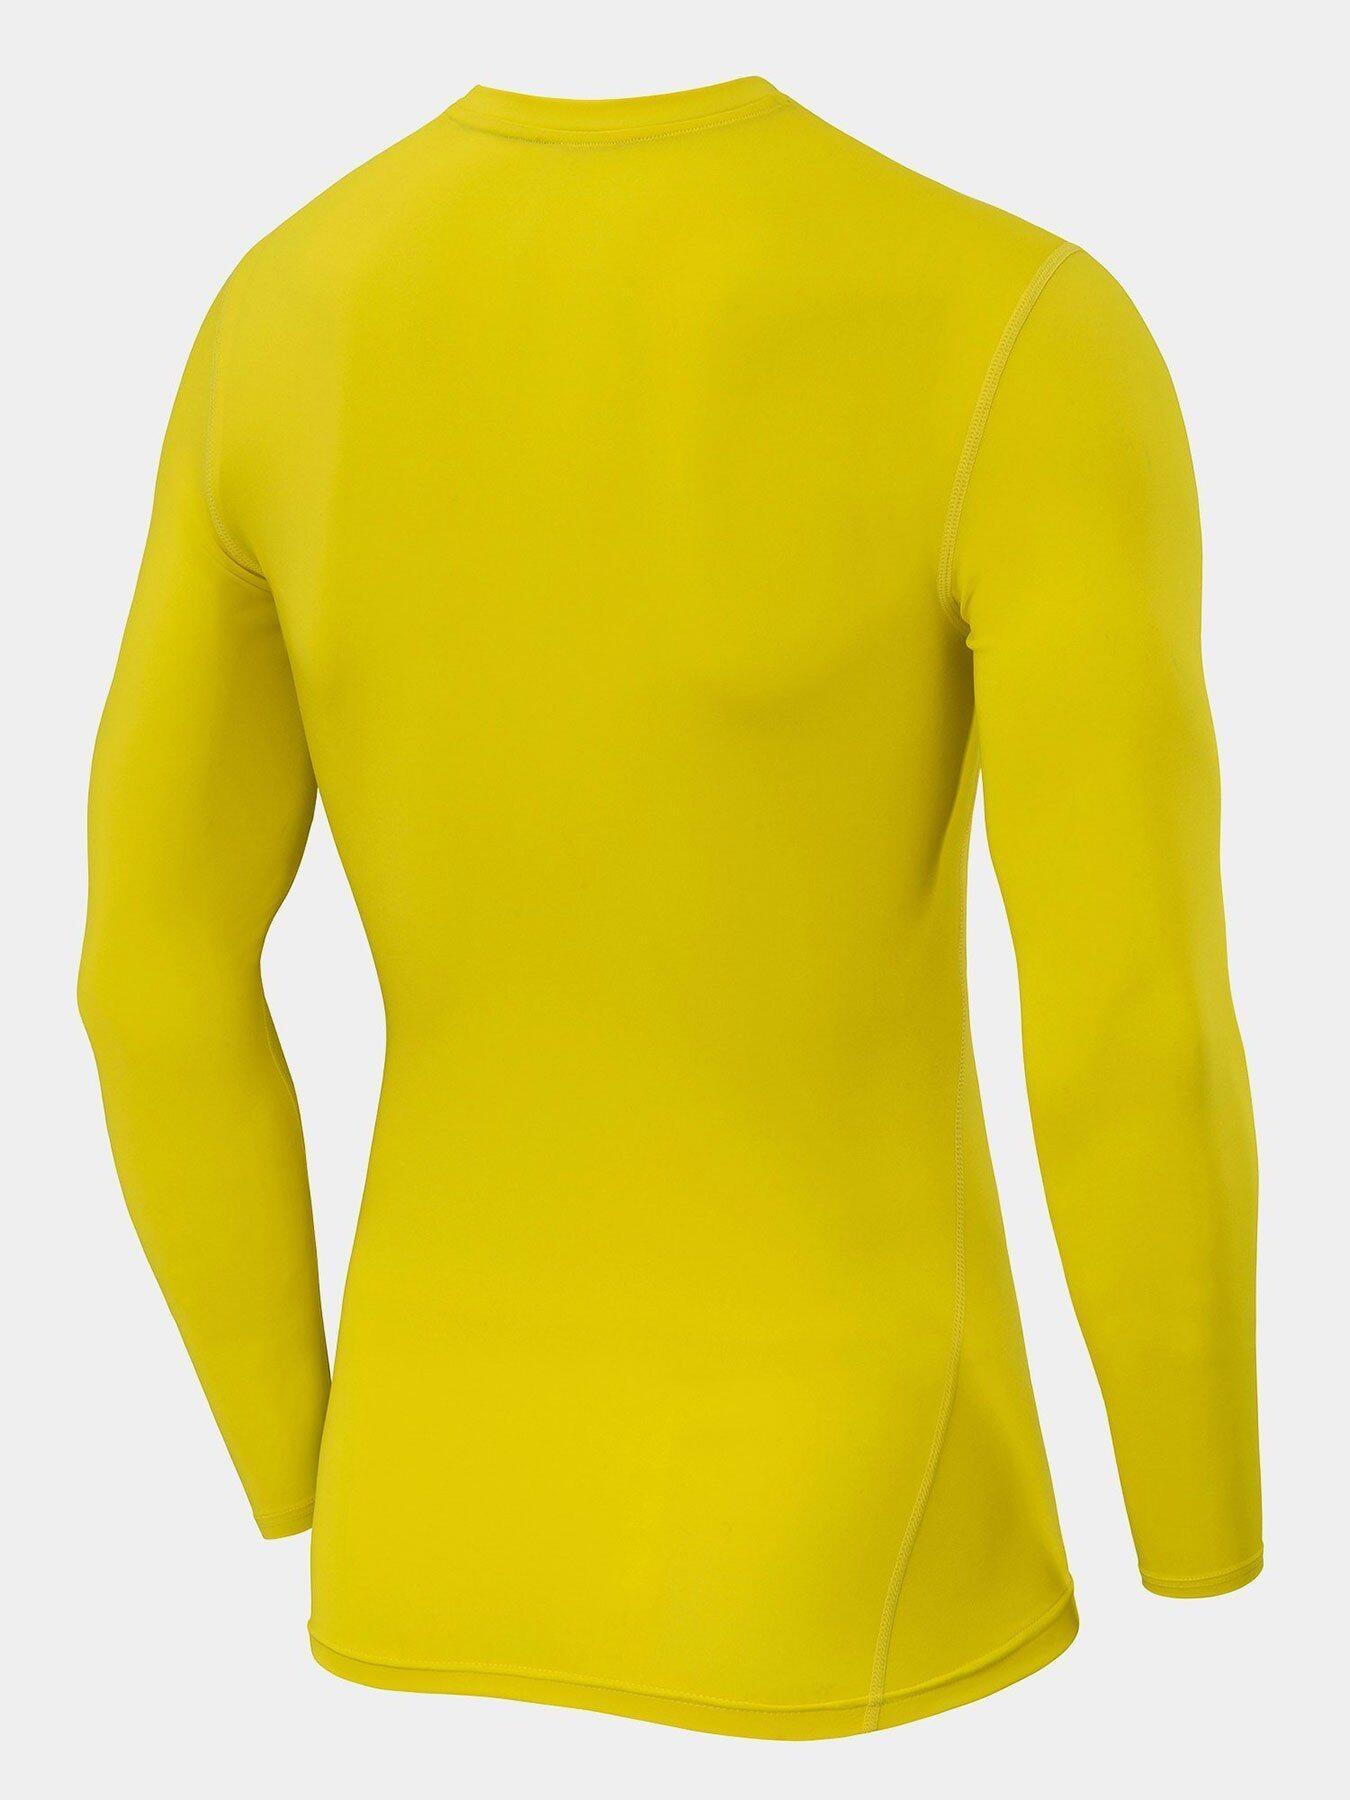 Men's Power Base Layer Compression Long Sleeve Top - Sonic Yellow 2/5